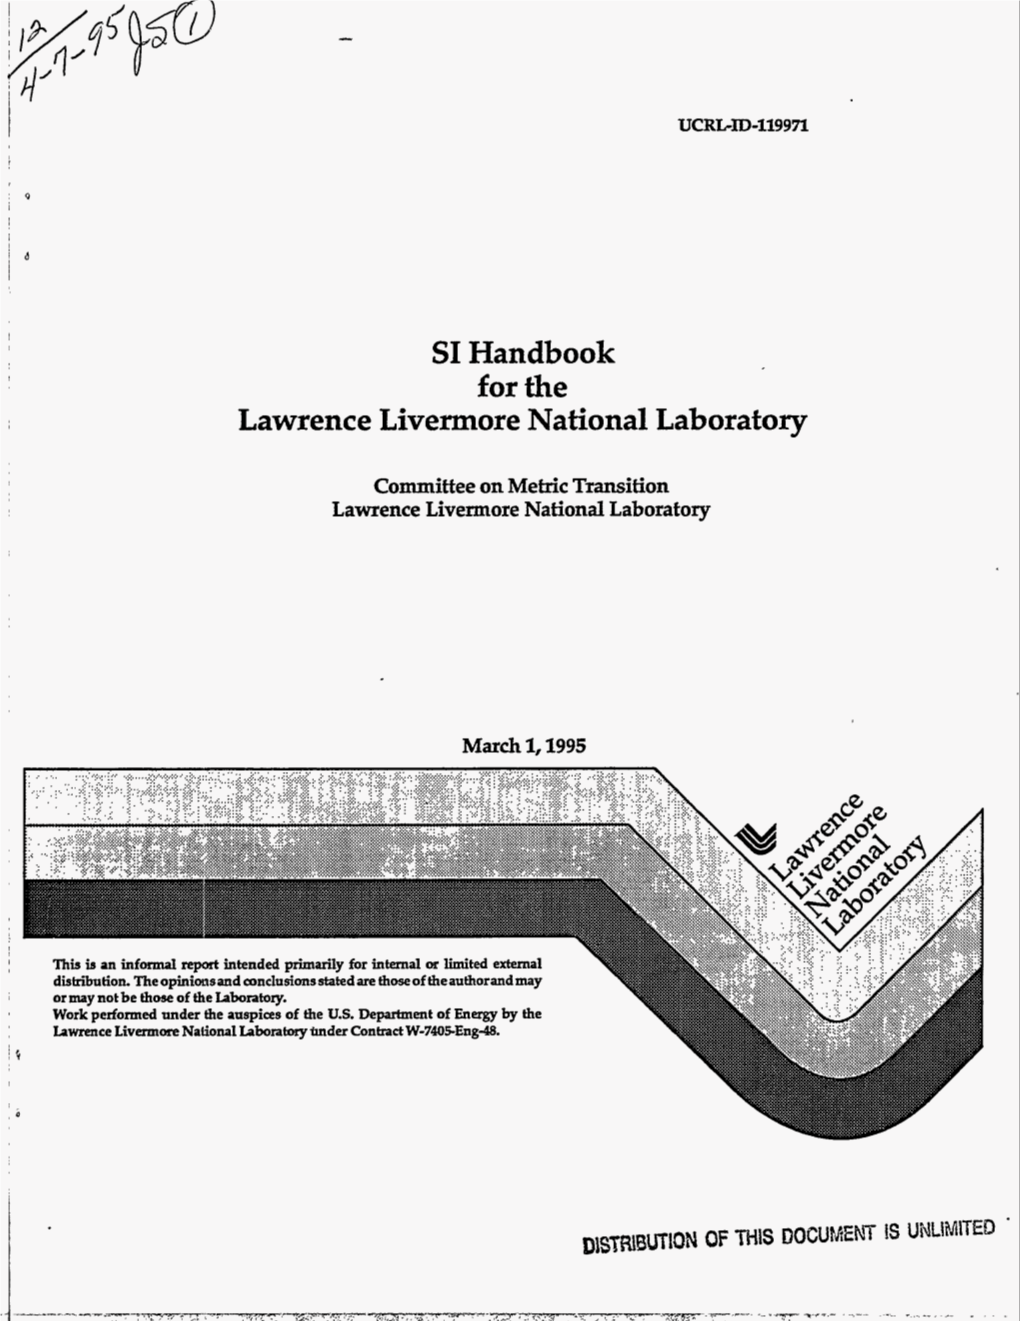 SI Handbook for the Lawrence Livermore National Laboratory